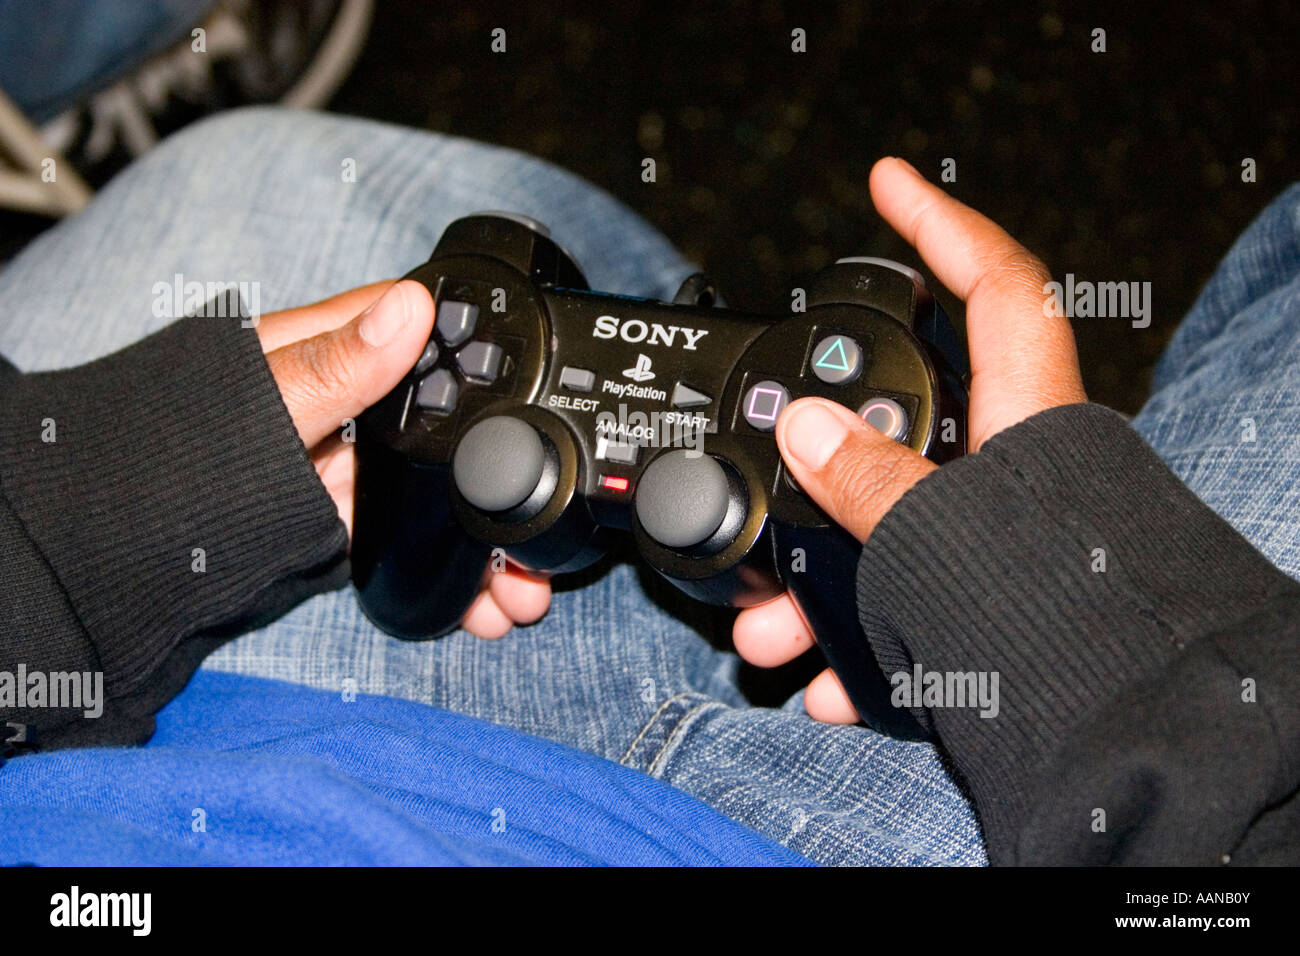 Controller held for playing Sony Playstation in after school study program.  St Paul Minnesota USA Stock Photo